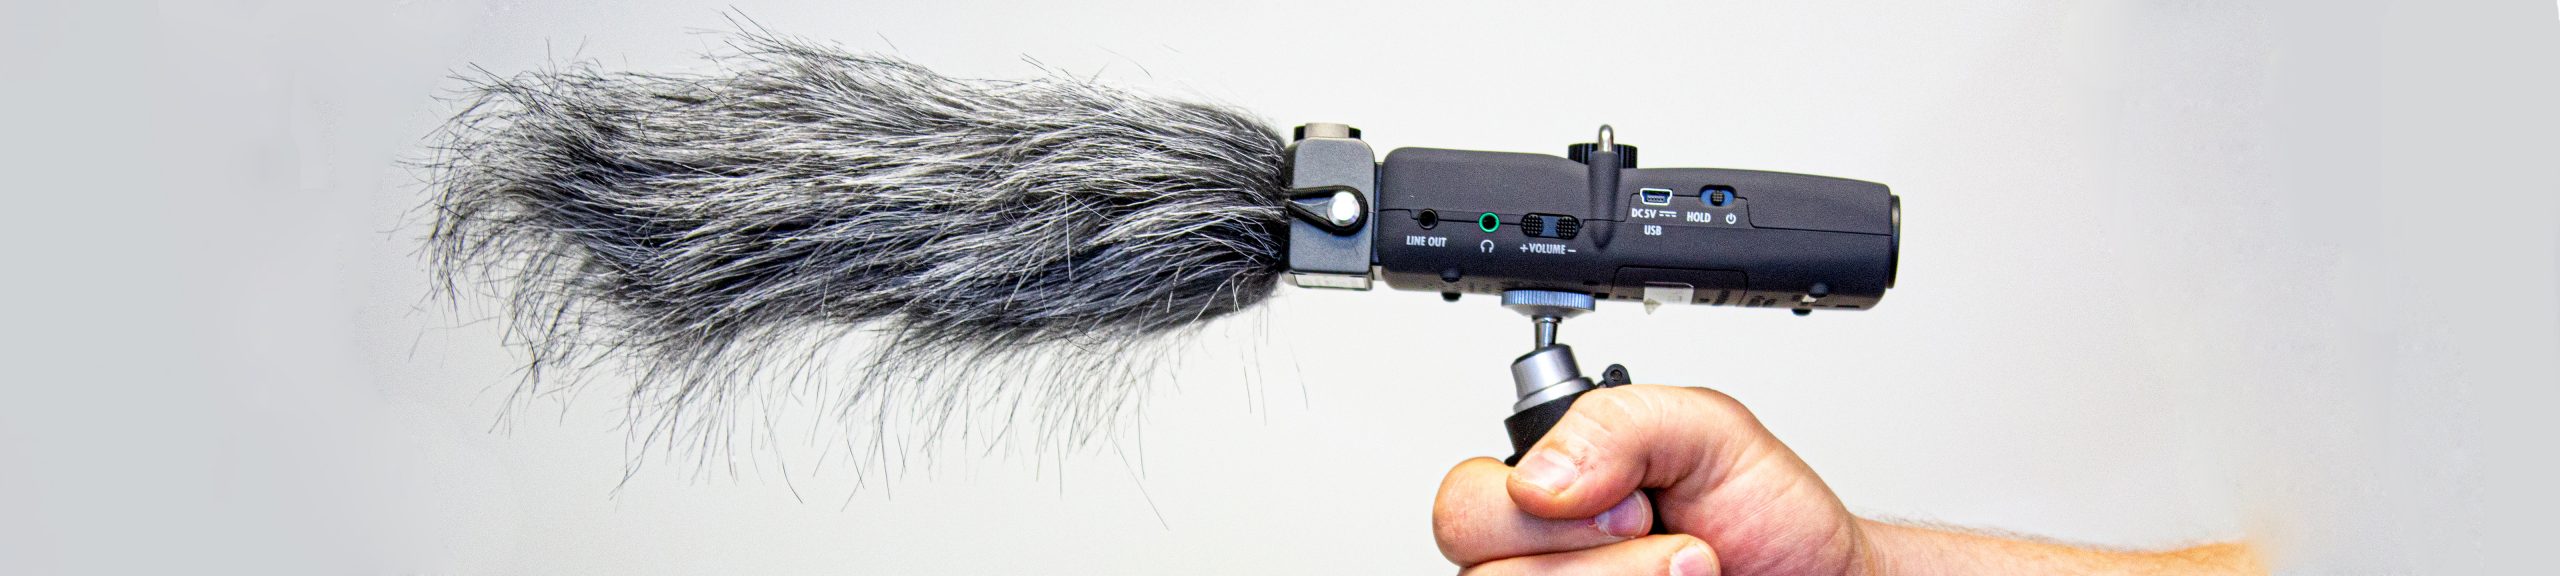 Photo of hand holding grip, digital recorder with shotgun capsule and grey furry wind shield.